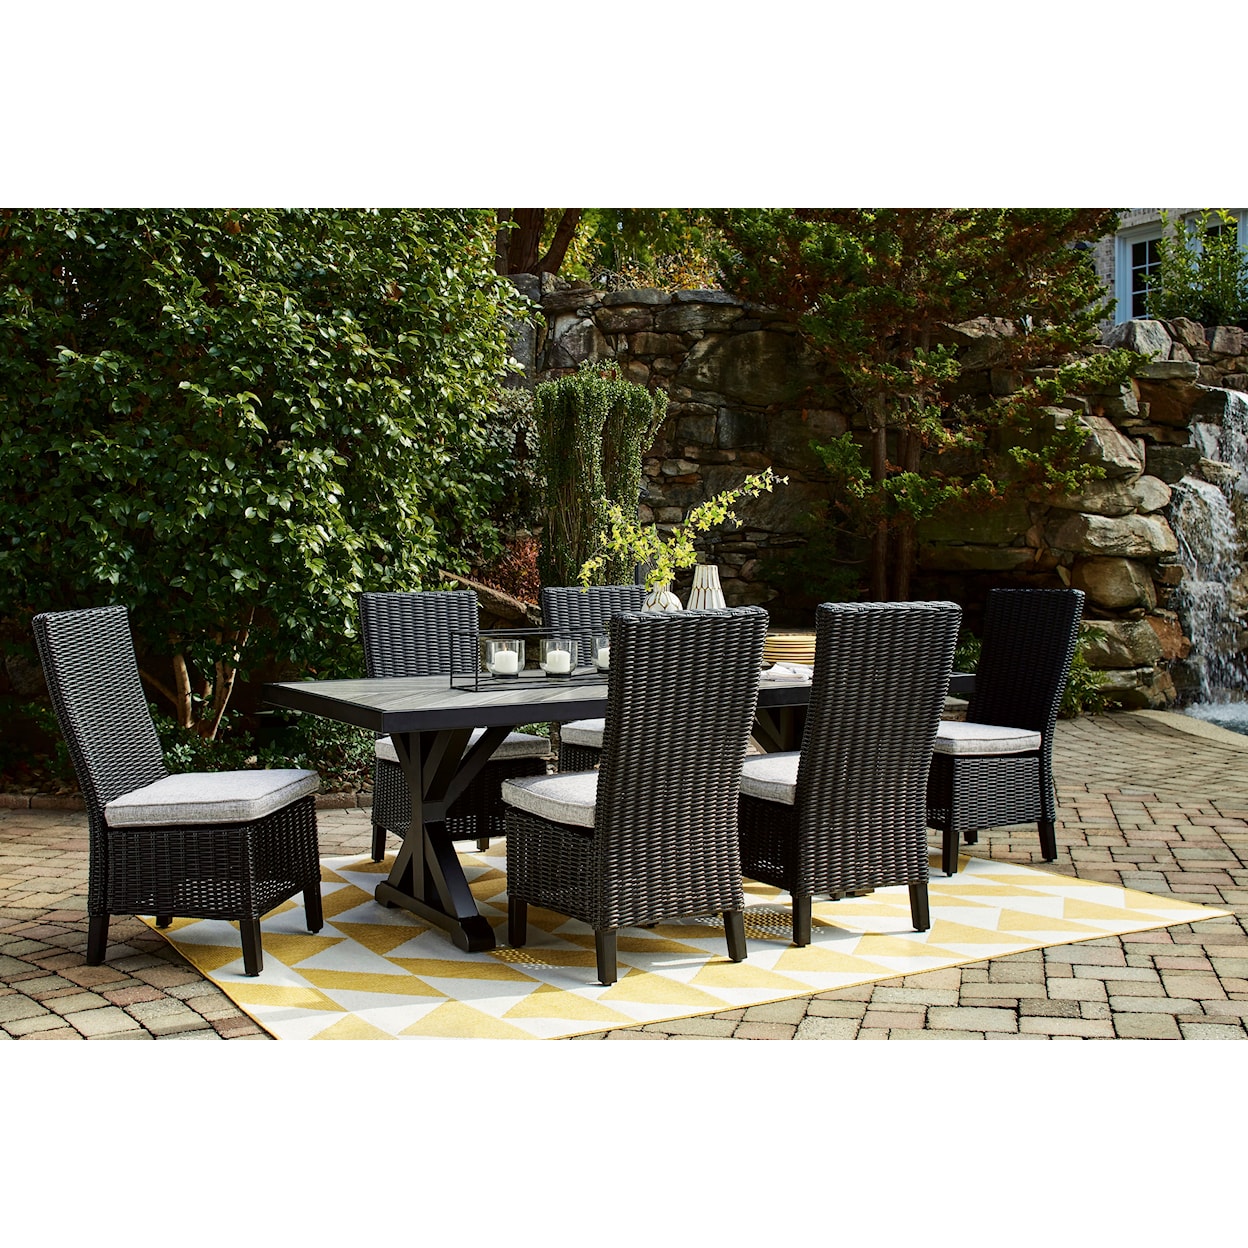 Signature Design by Ashley Beachcroft Outdoor Dining Table with 6 Chairs